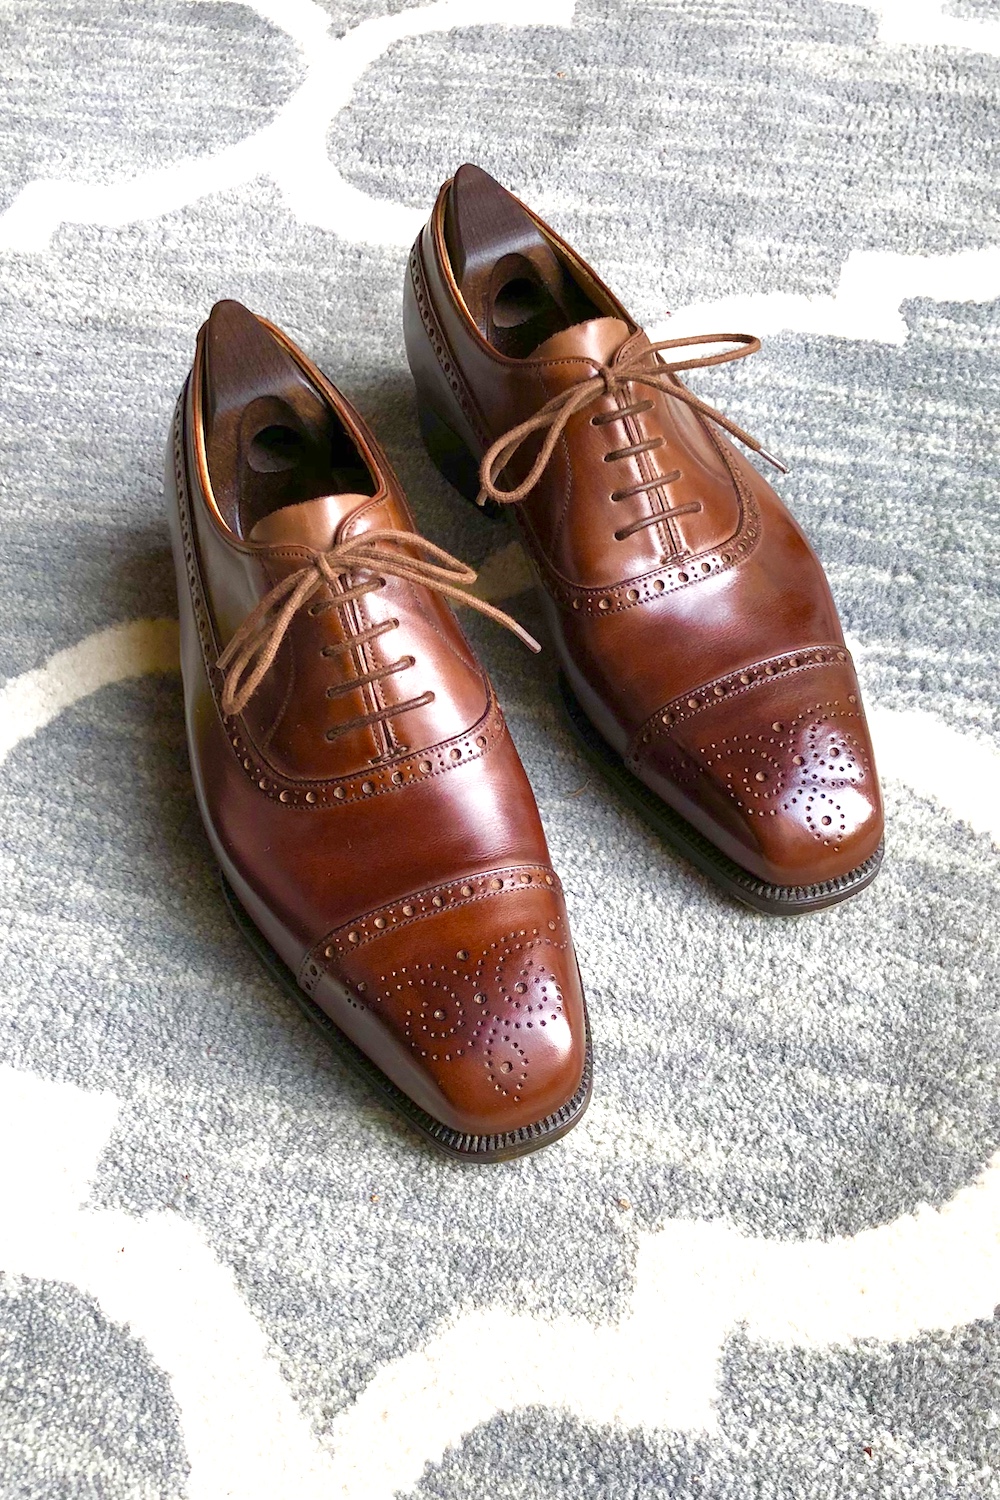 Adelaide oxford shoes.